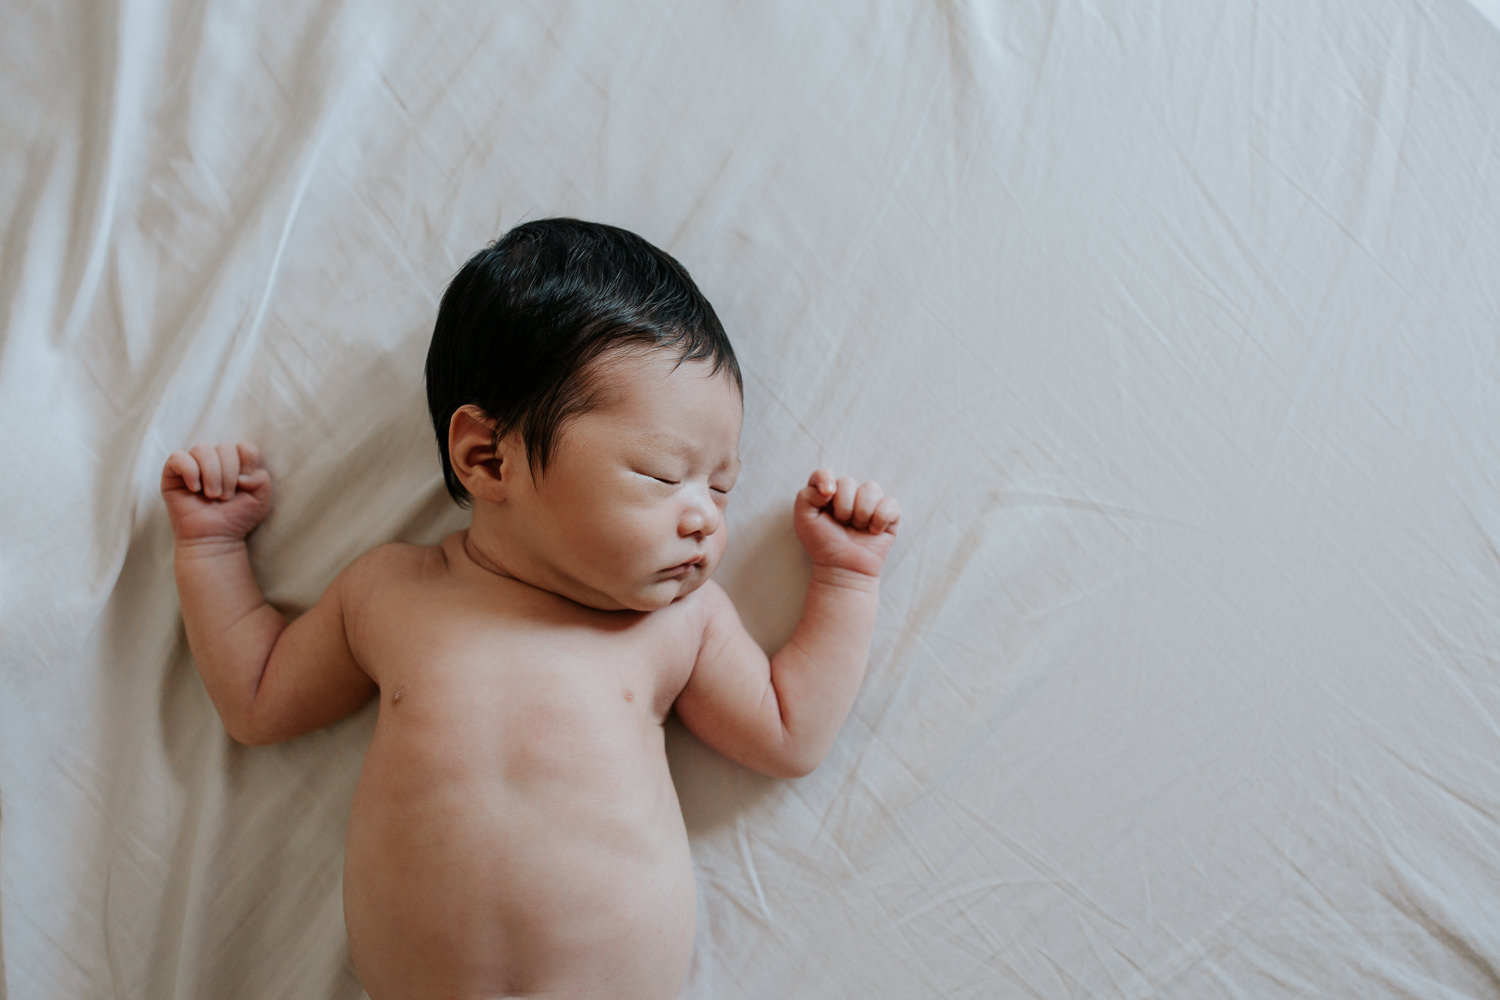 2 week old baby boy with long dark hair in diaper lying on bed, body covered by white swaddle, arms out, head to side, sleeping - Uxbridge Lifestyle Photos